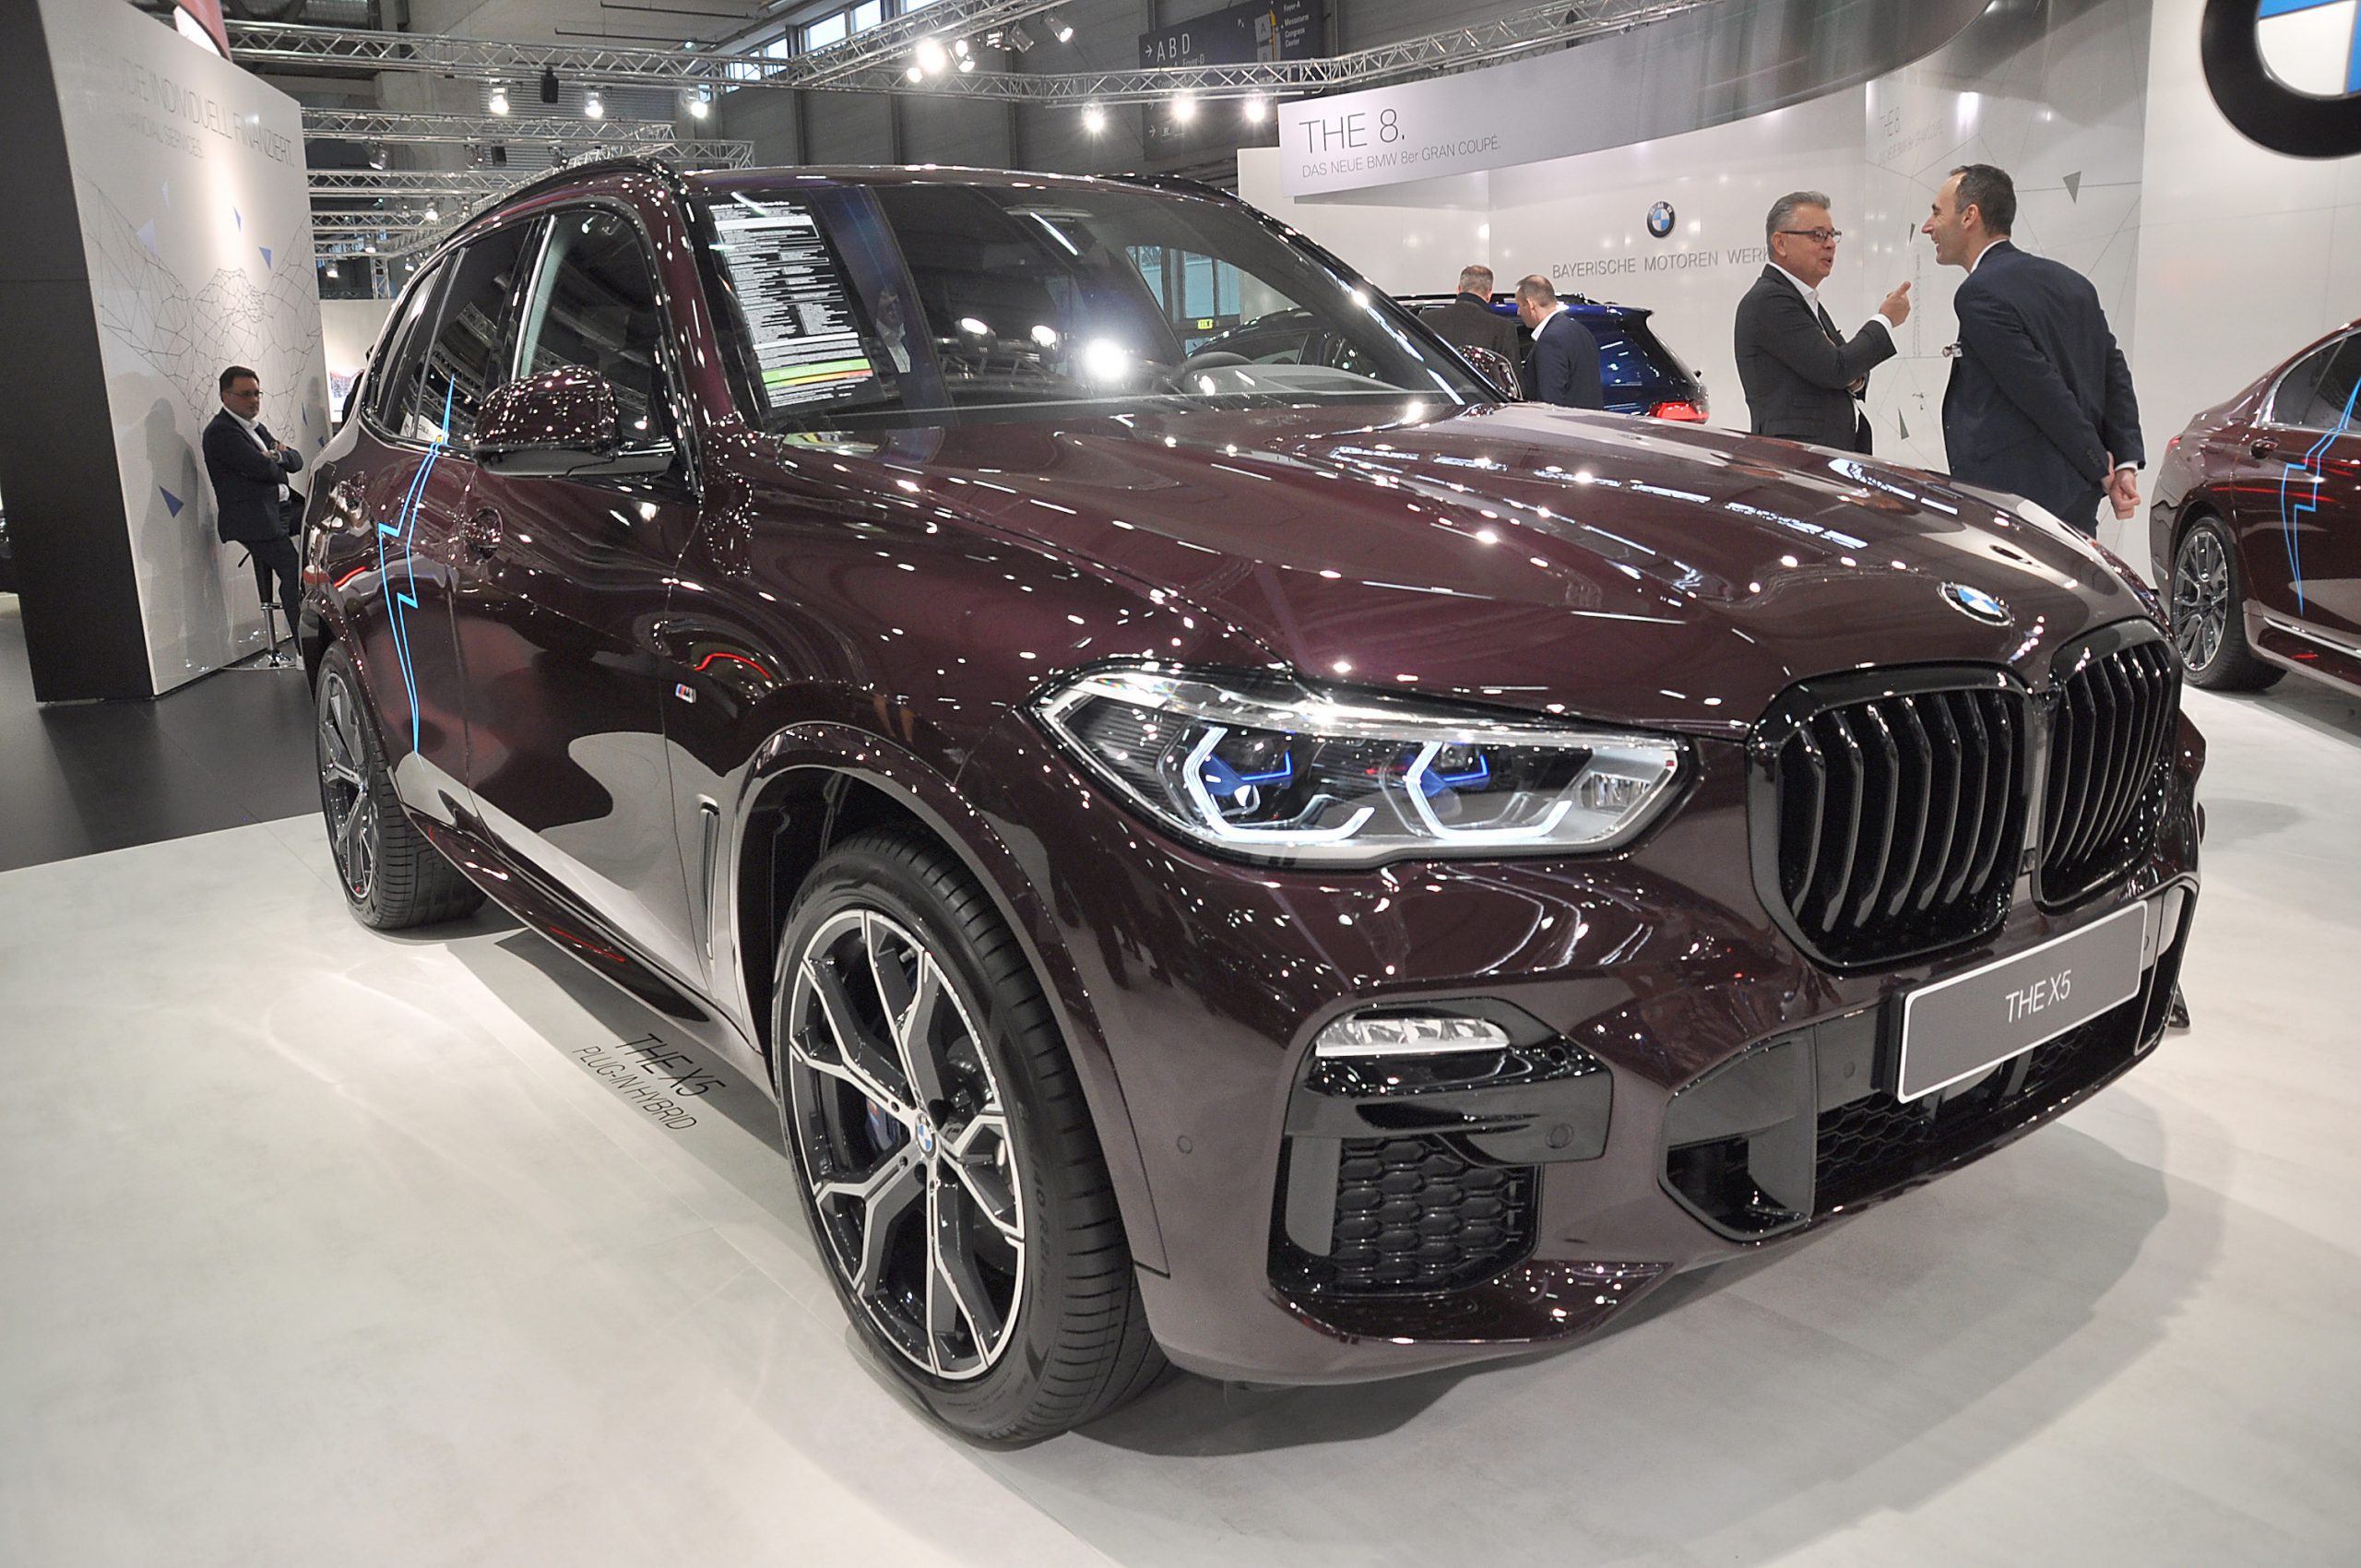 A BMW X5 is seen during the Vienna Car Show press preview at Messe Wien, as part of Vienna Holiday Fair